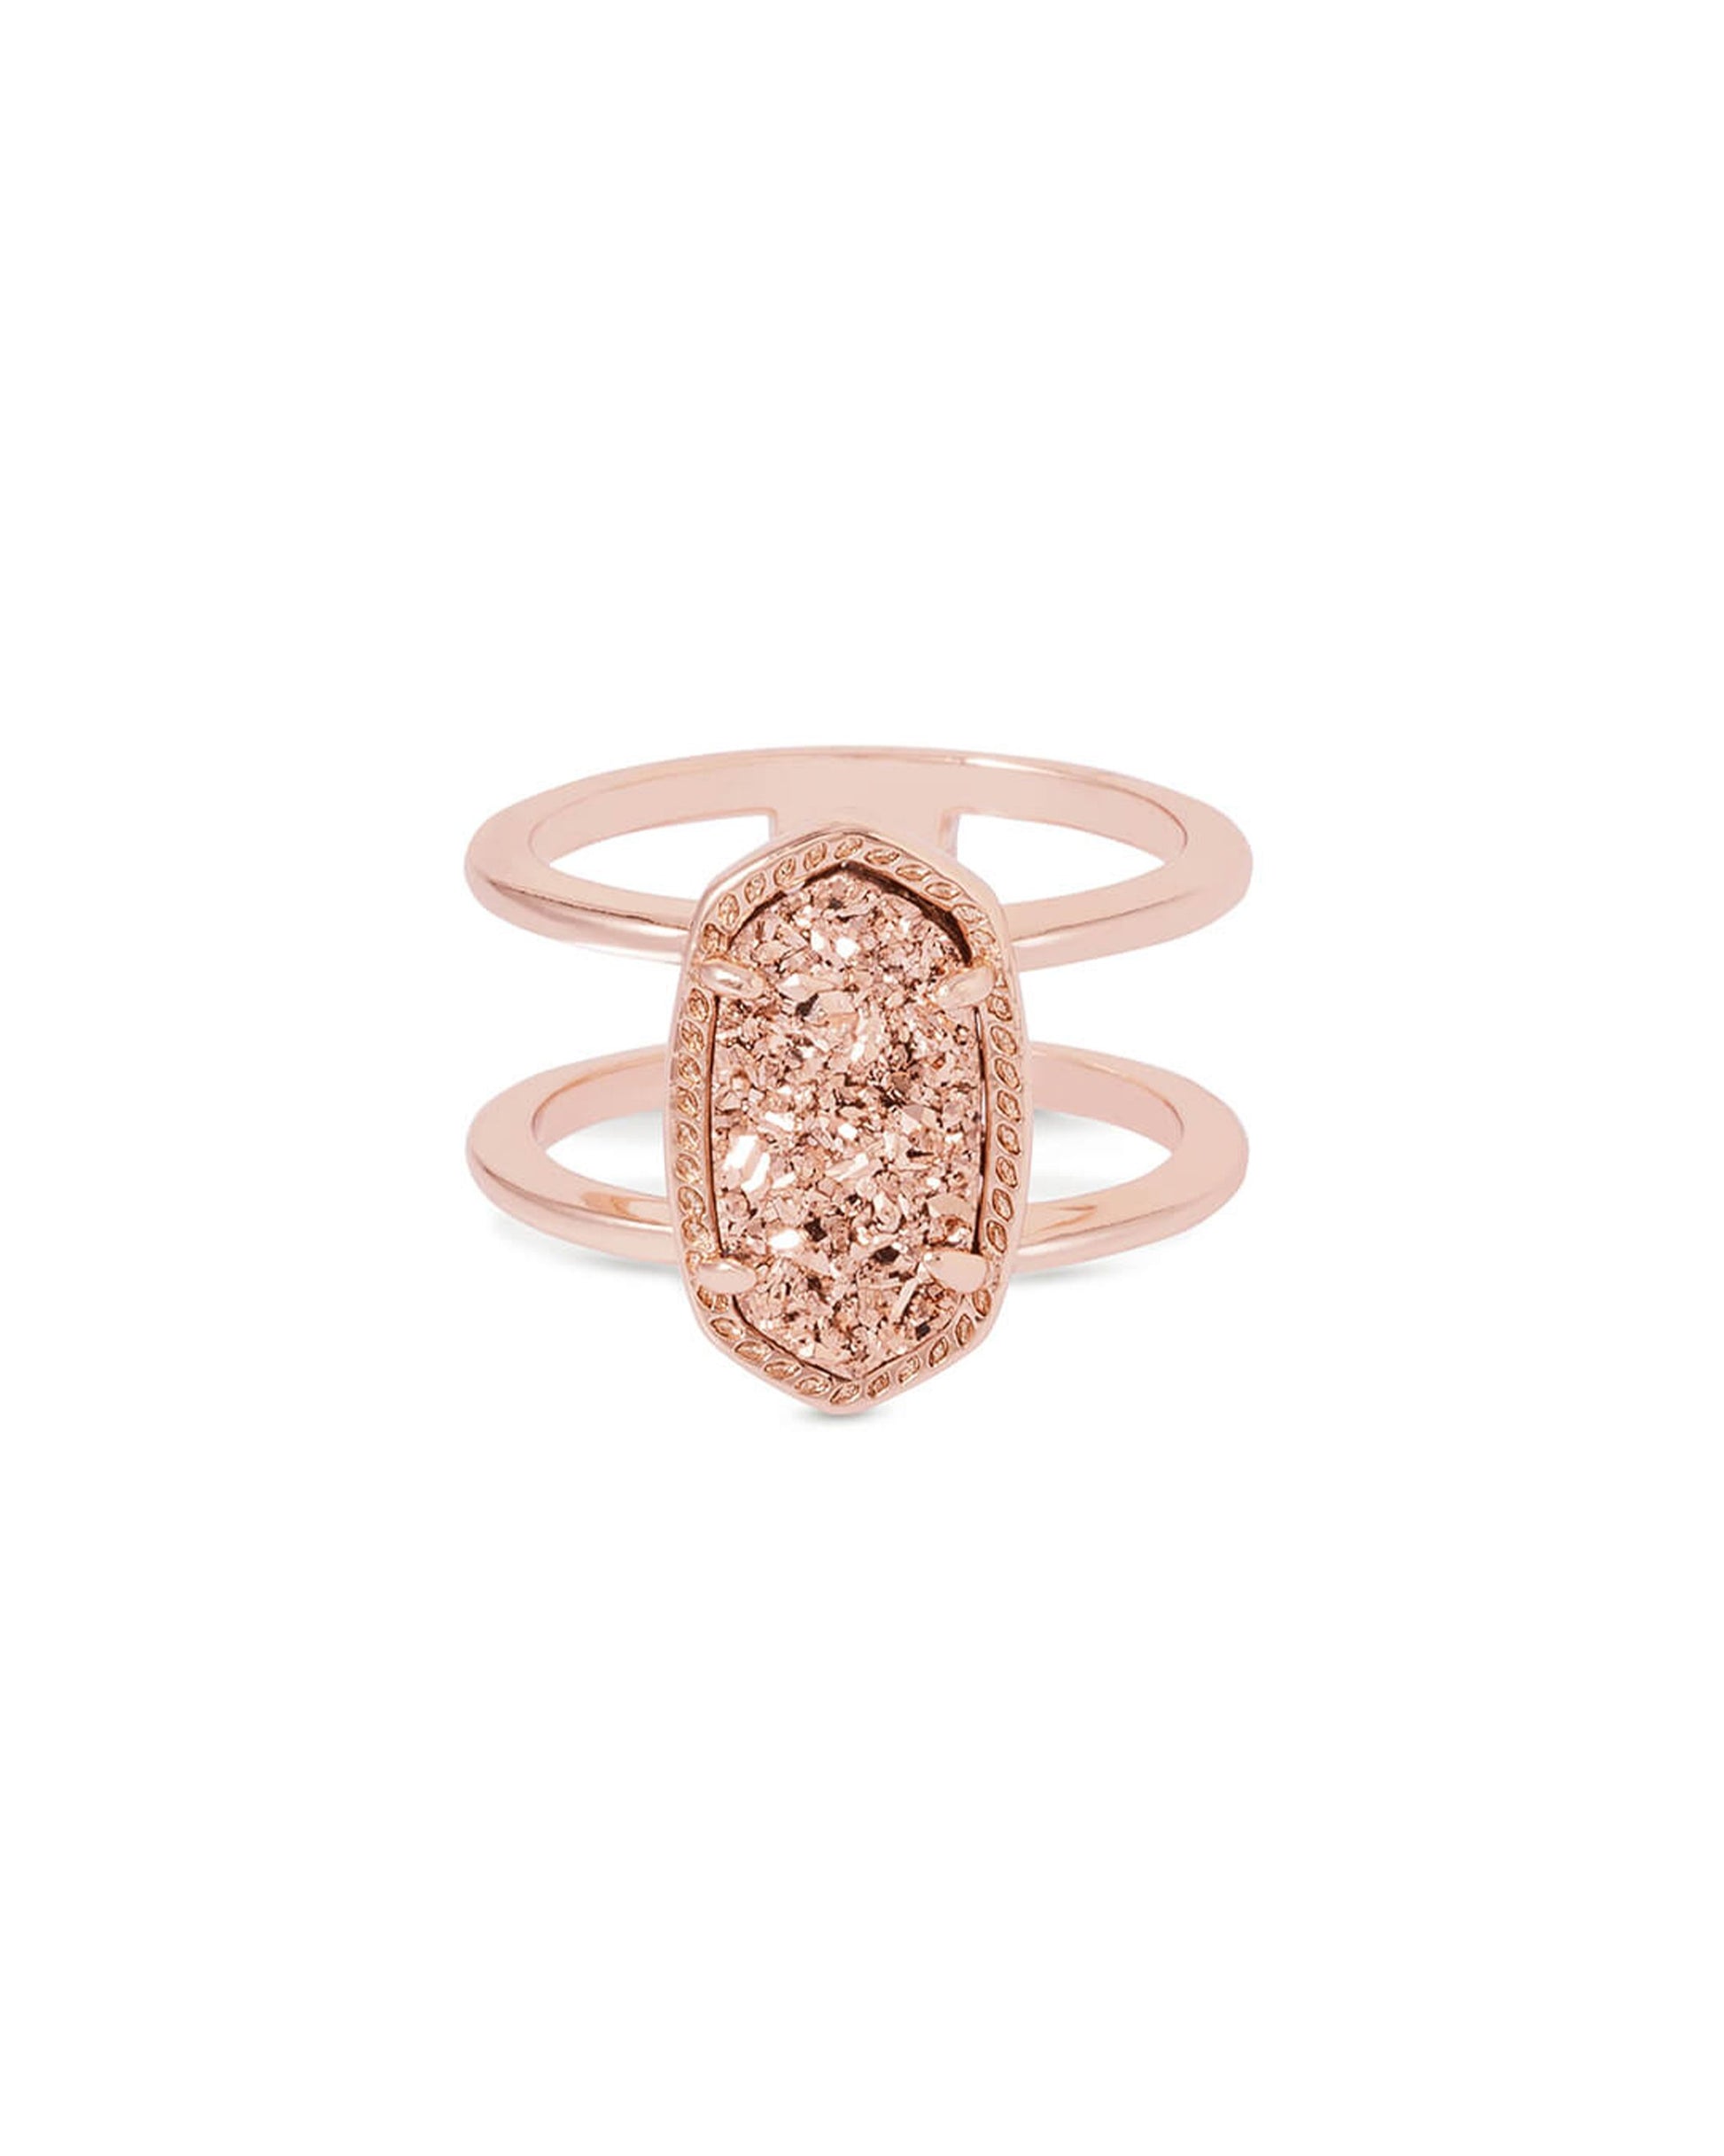 Kendra Scott Elyse Double Band Rose Gold Ring - Rose Gold Drusy-Rings-Kendra Scott-APRIL2022, KS, R1052RSG-The Twisted Chandelier